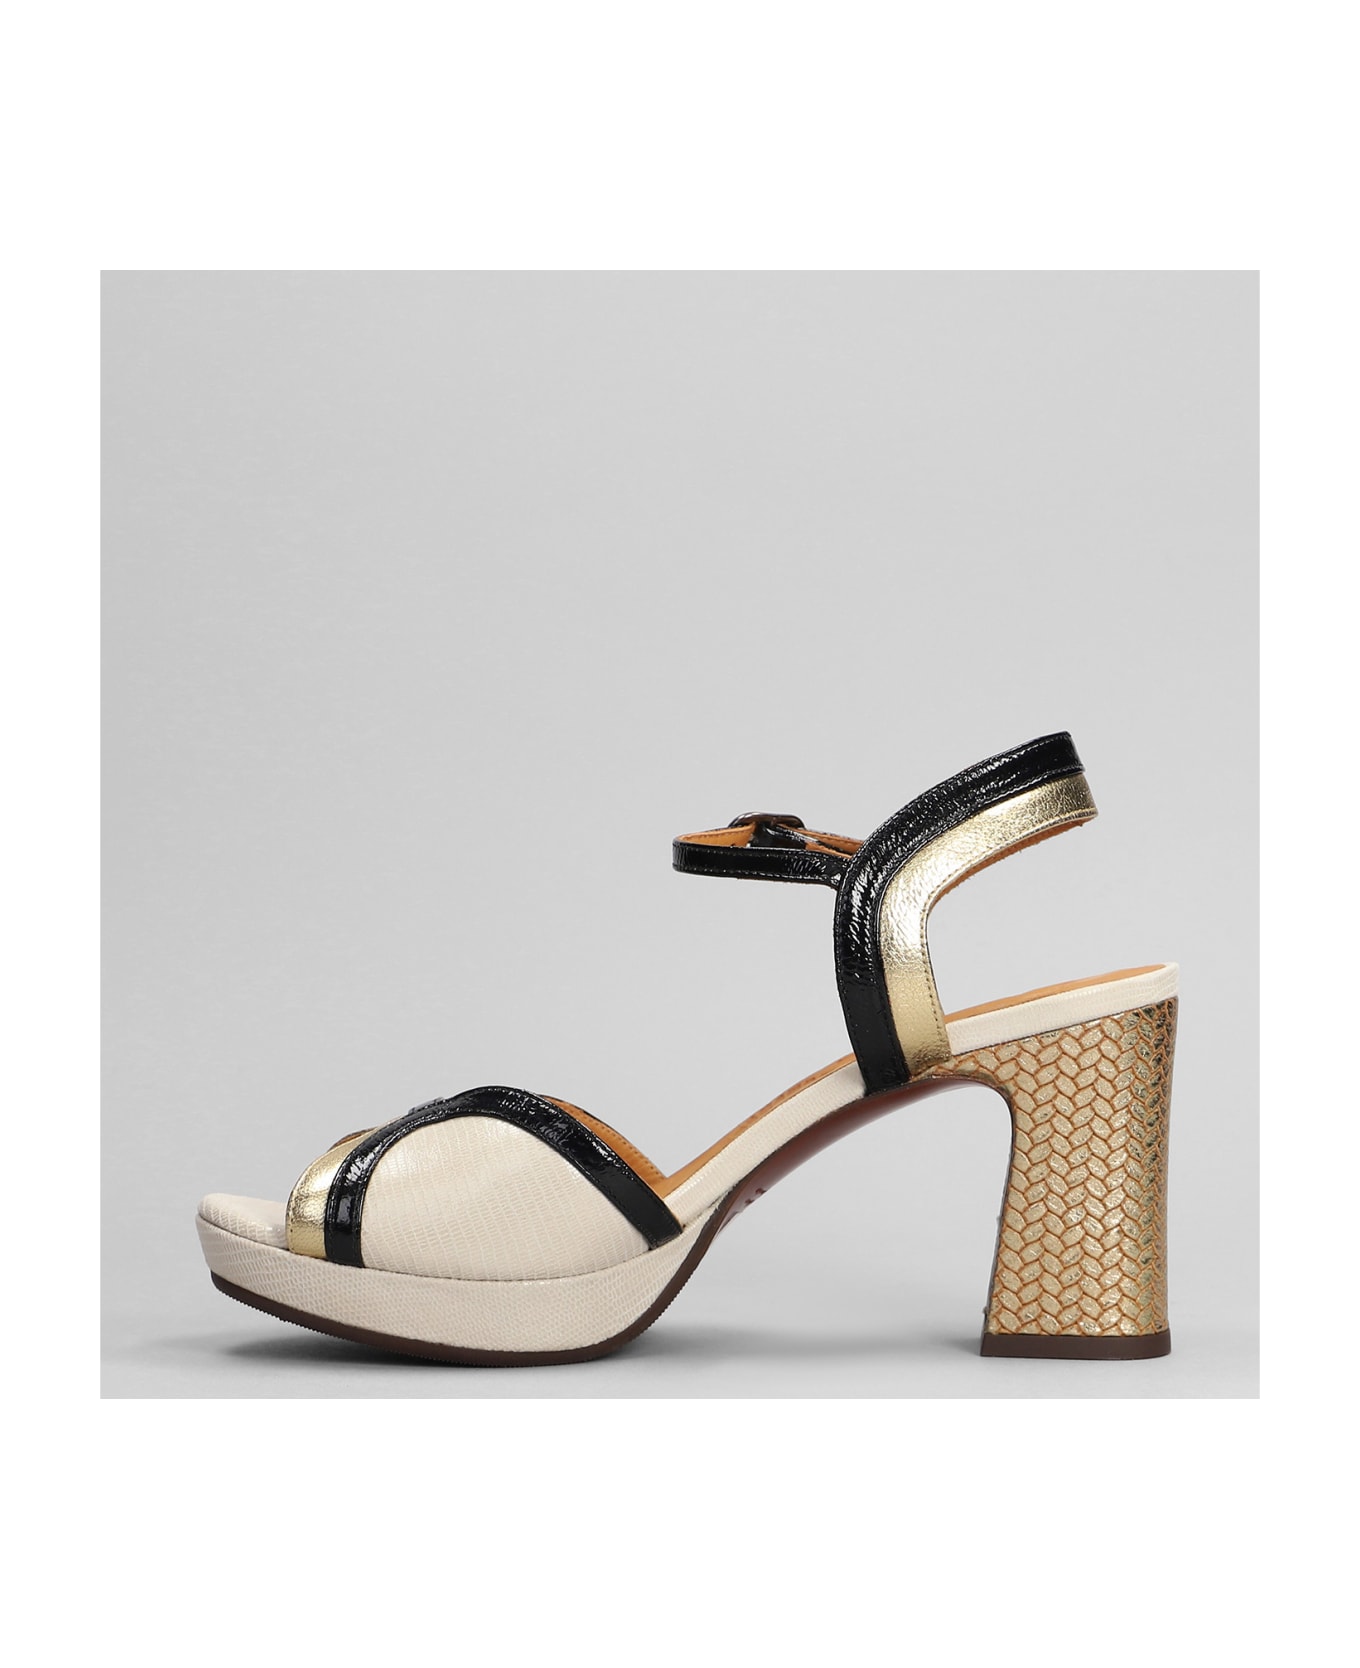 Chie Mihara Keny Sandals In Beige Leather - beige